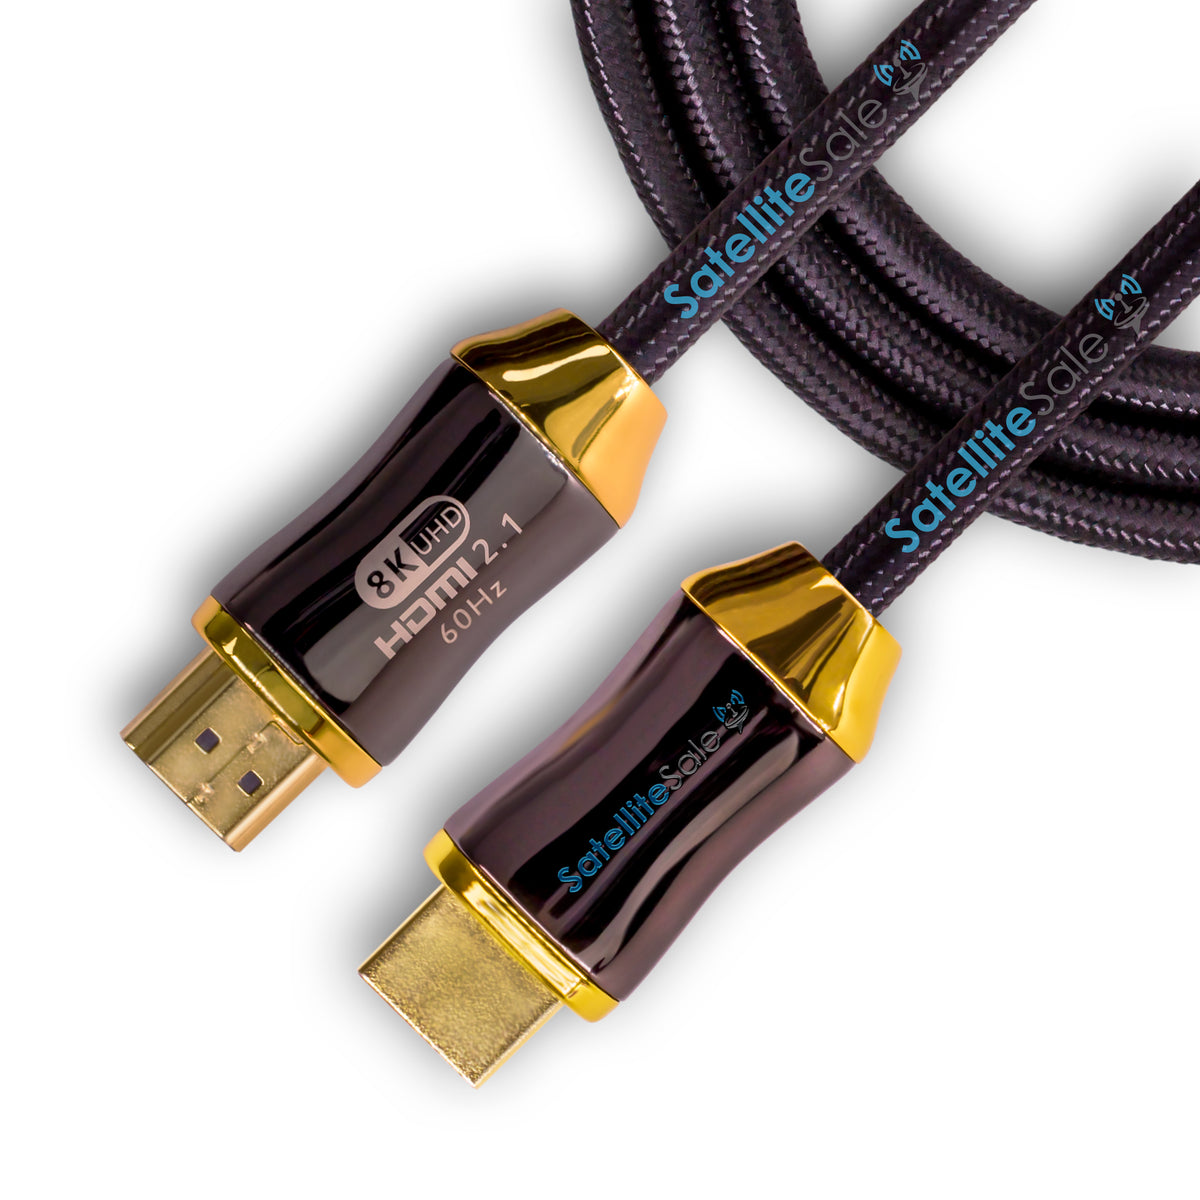 Hdr Hdmi Cable 4k, Hdmi Cables Qled, Cable Hdmi 2.1